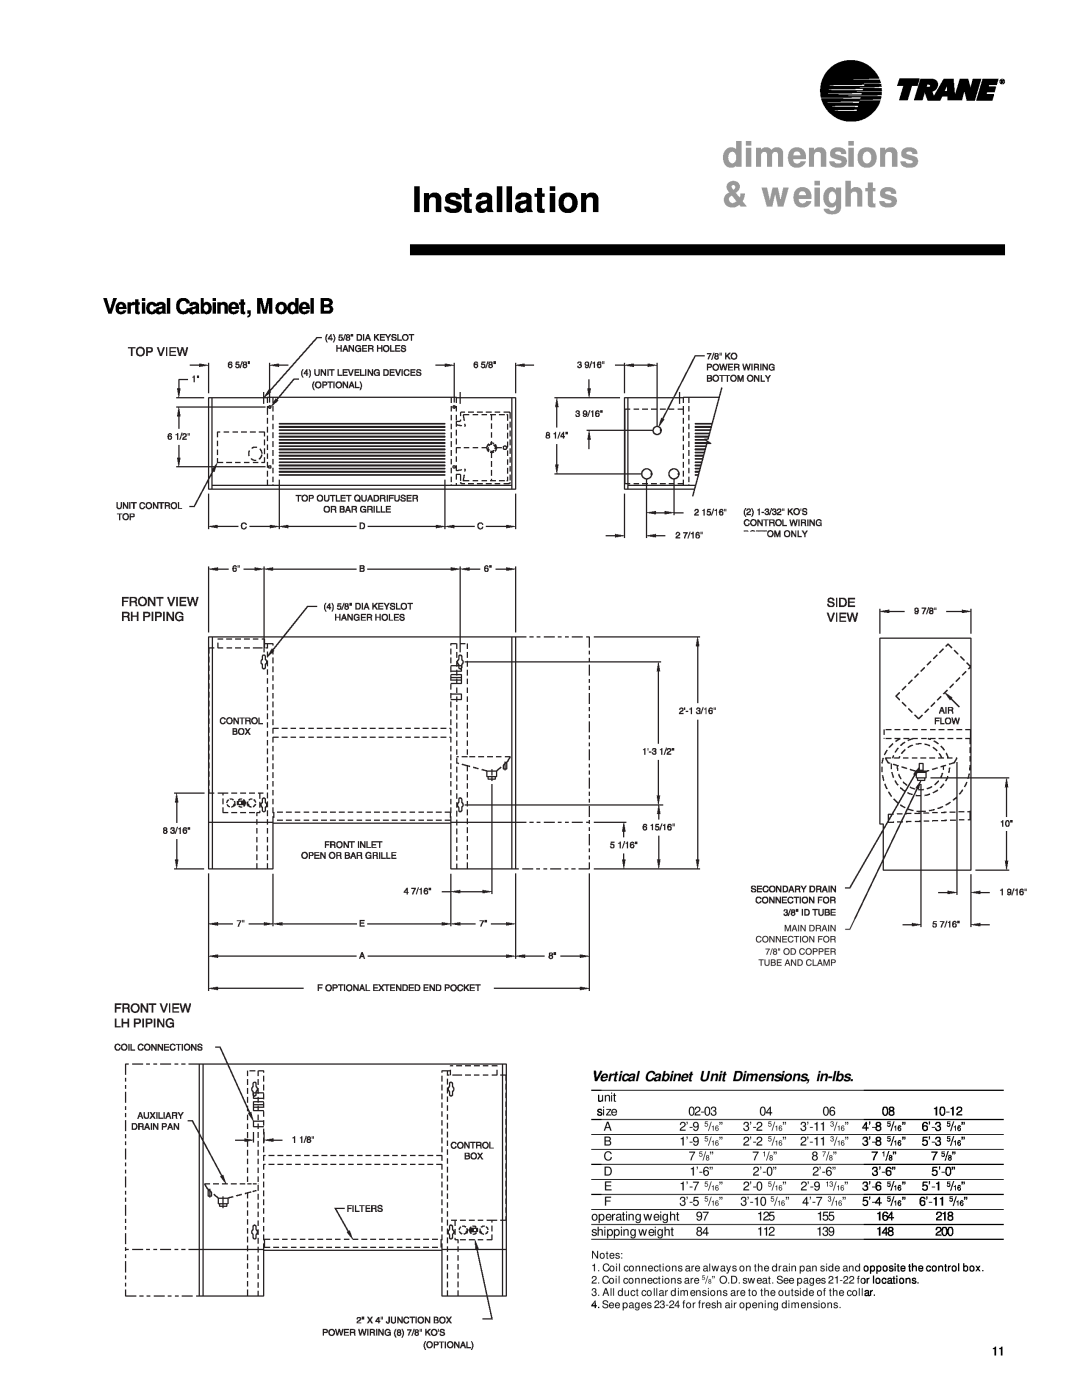 Trane UniTrane Fan-Coil & Force Flo Air Conditioners manual Vertical Cabinet, Model B, dimensions, Installation, weights 